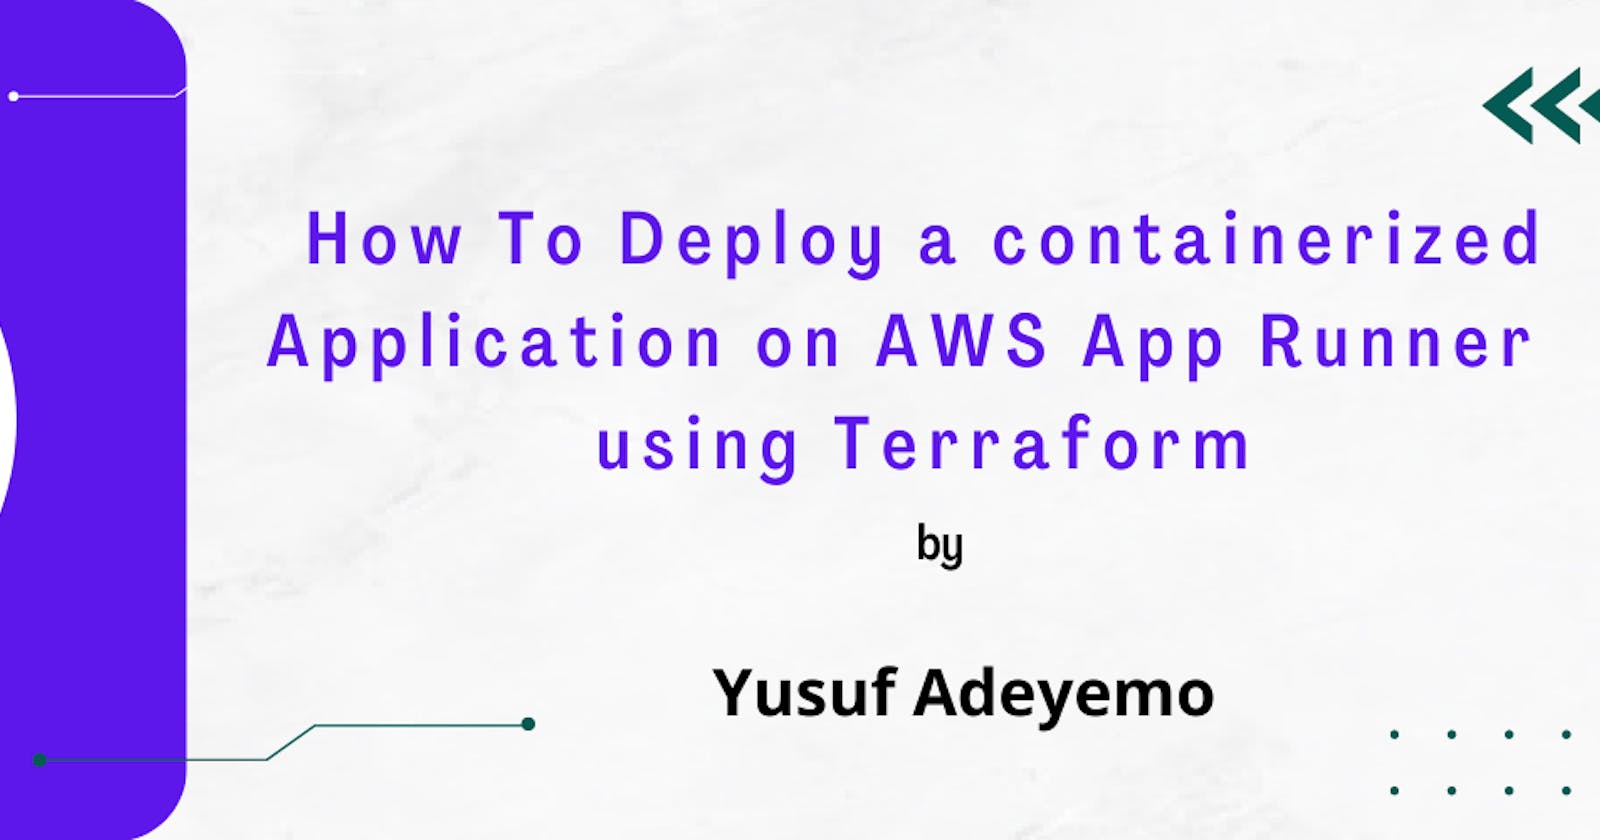 How To Deploy a containerized Application on AWS App Runner  using Terraform